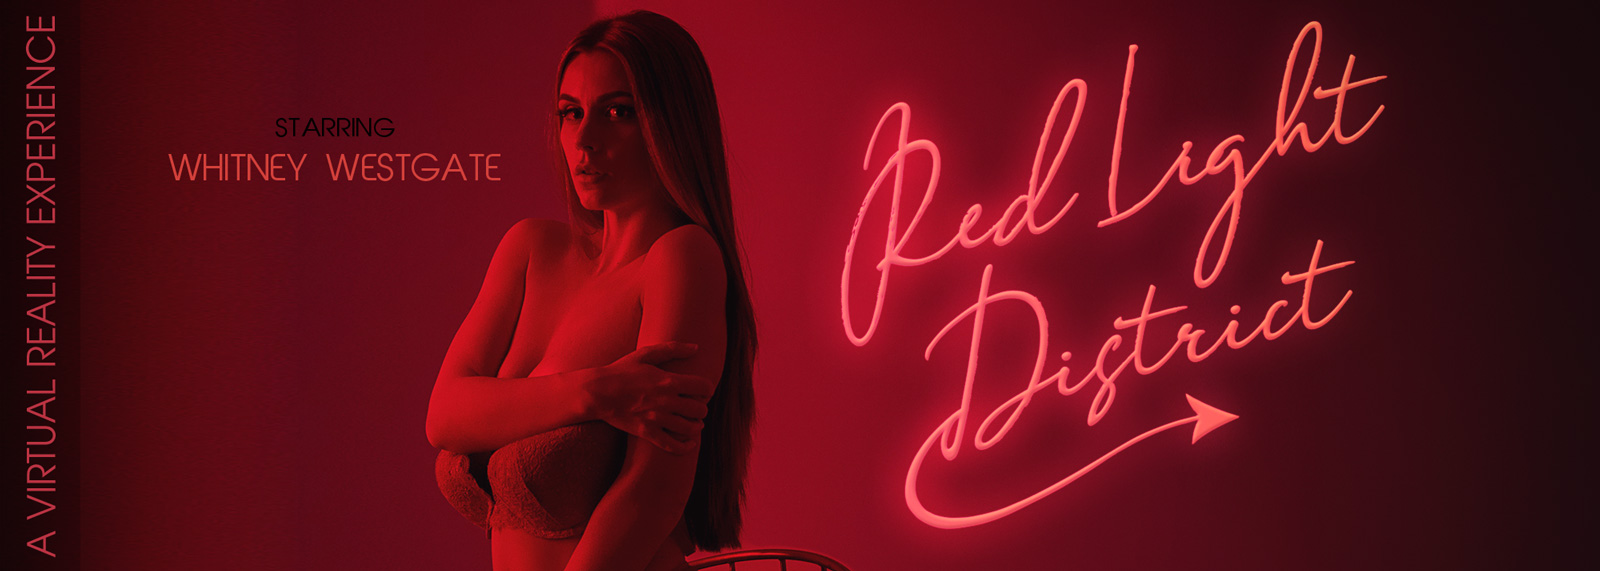 Red Light District - VR Porn Video, Starring: Whitney Westgate